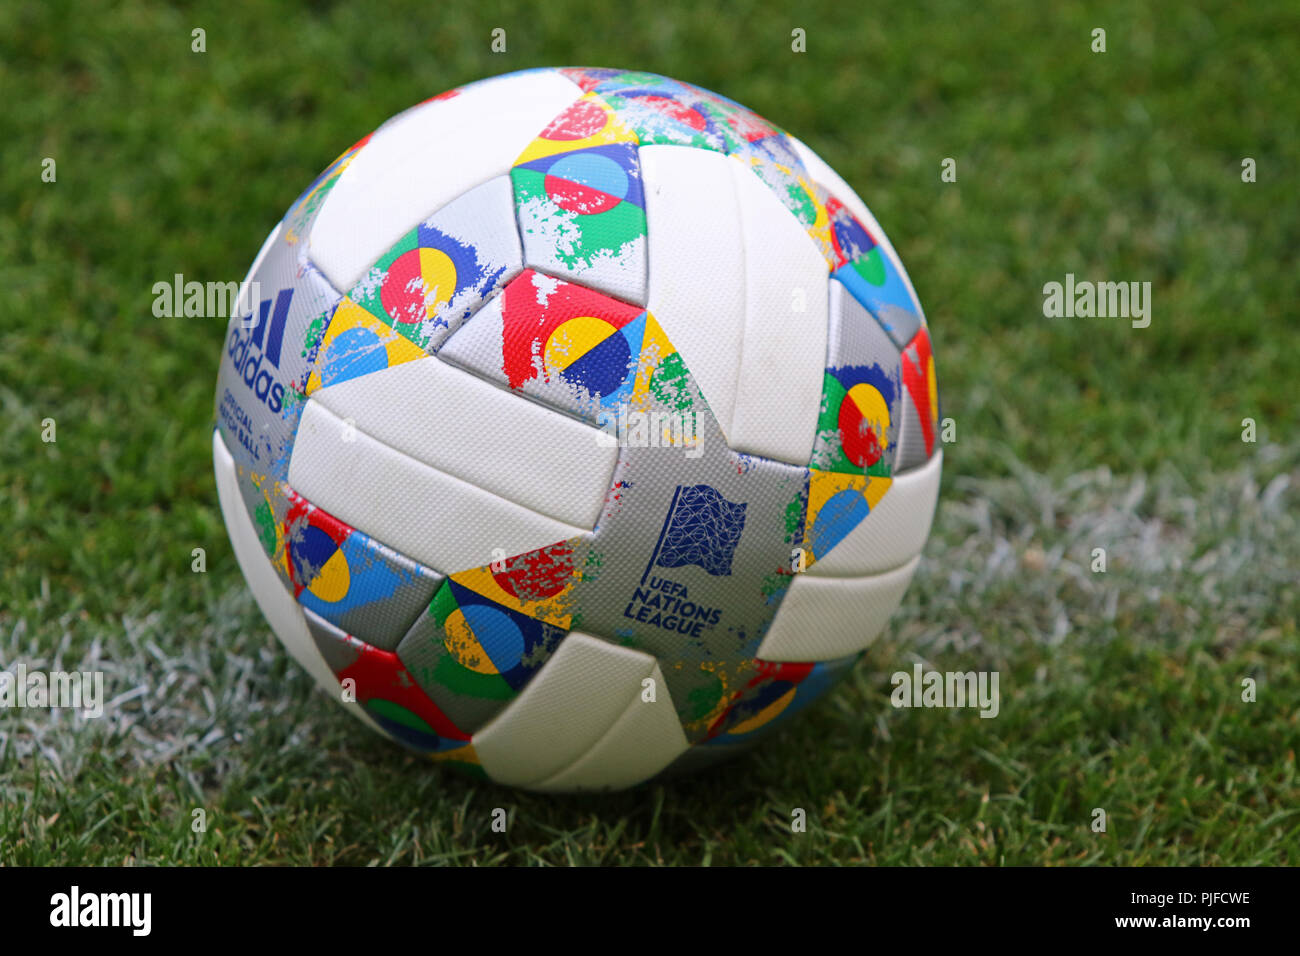 KYIV, UKRAINE - SEPTEMBER 4, 2018: Adidas Nations League, official match  ball of UEFA Nations League 2018/2019 on the grass. Ball has colorful  design Stock Photo - Alamy